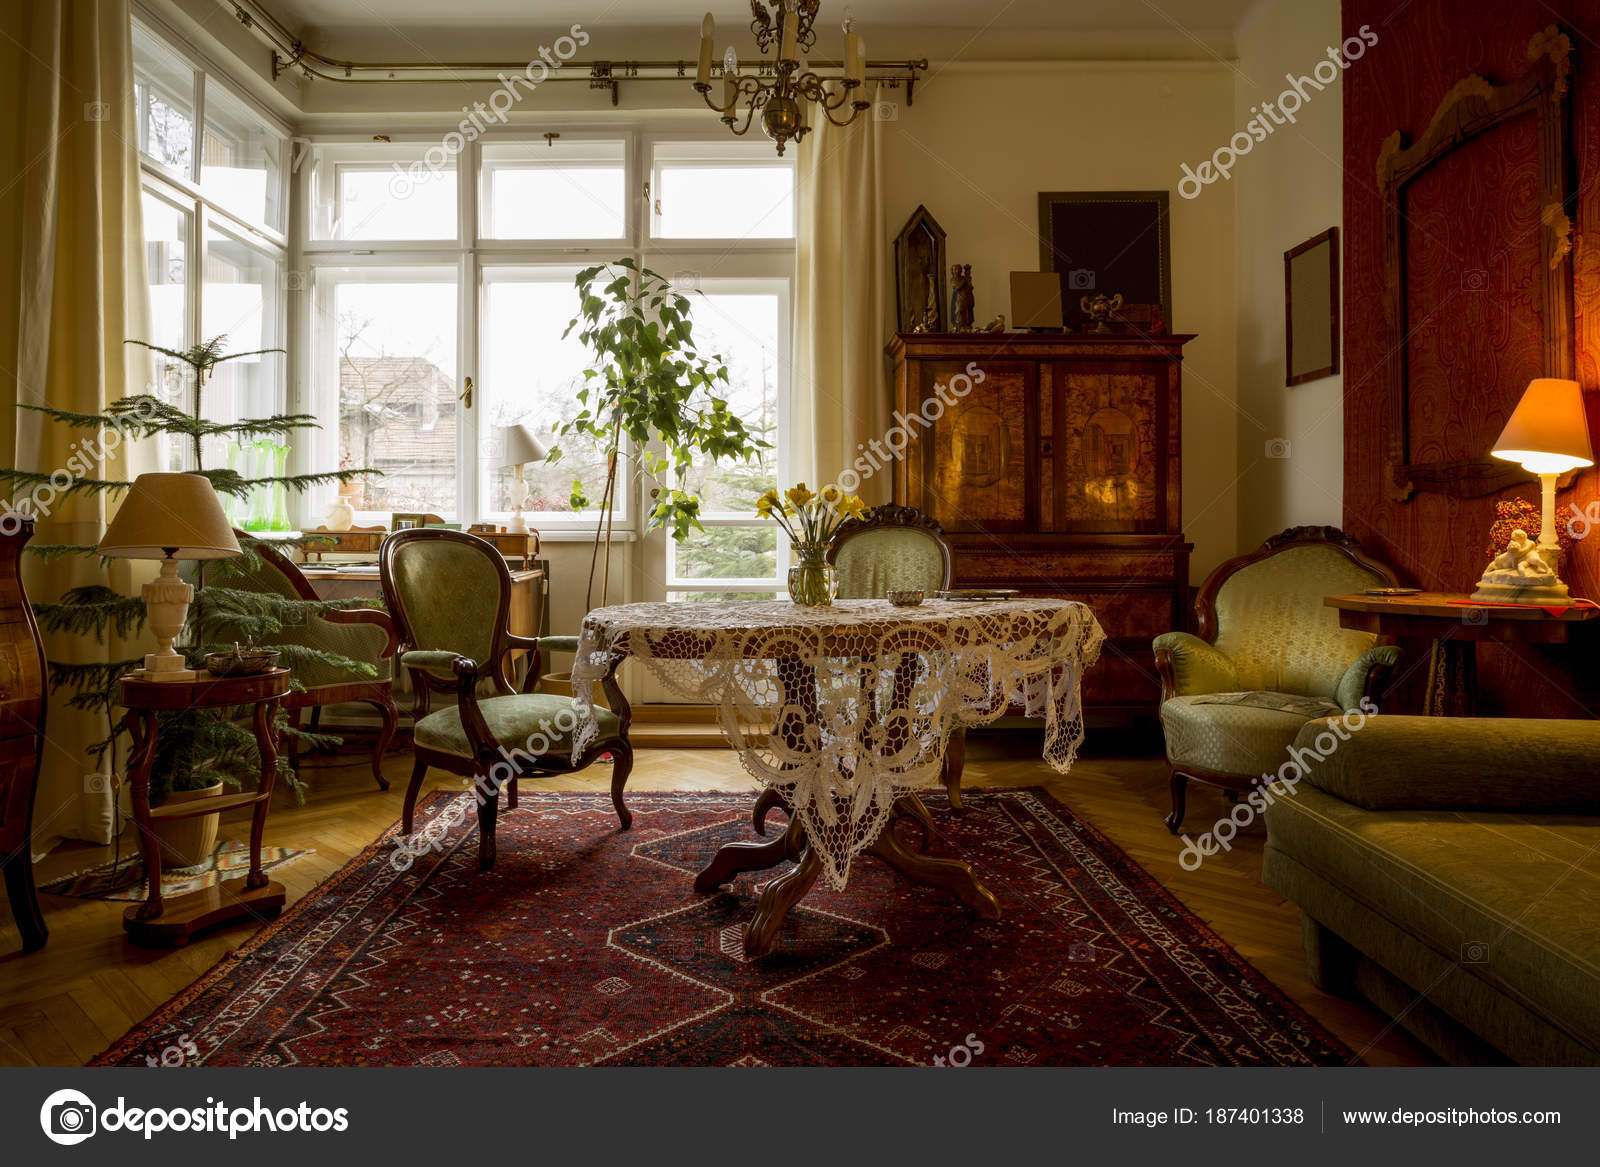 Old Fashioned Sitting Room With Antique, Old Fashioned Living Room Furniture